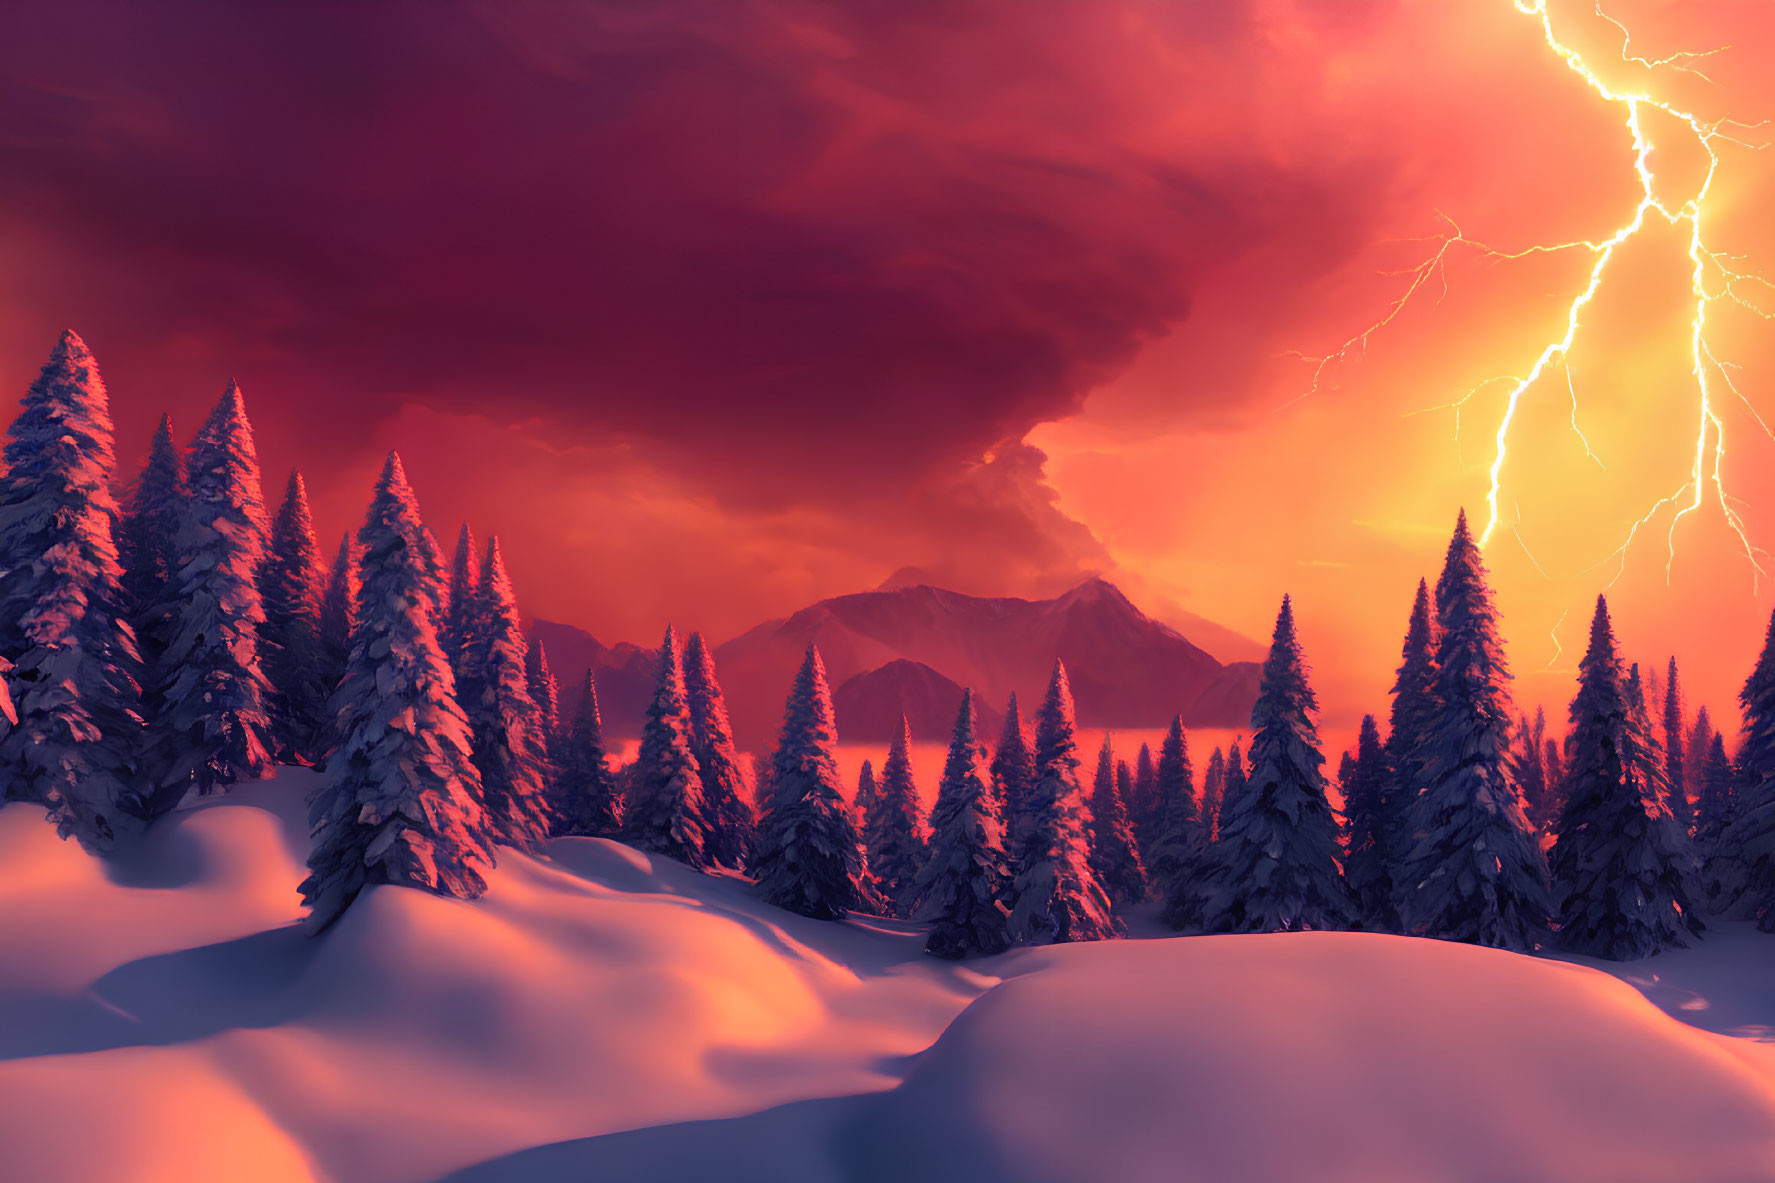 Snow-covered pine trees under red sky with lightning bolt illuminating mountains